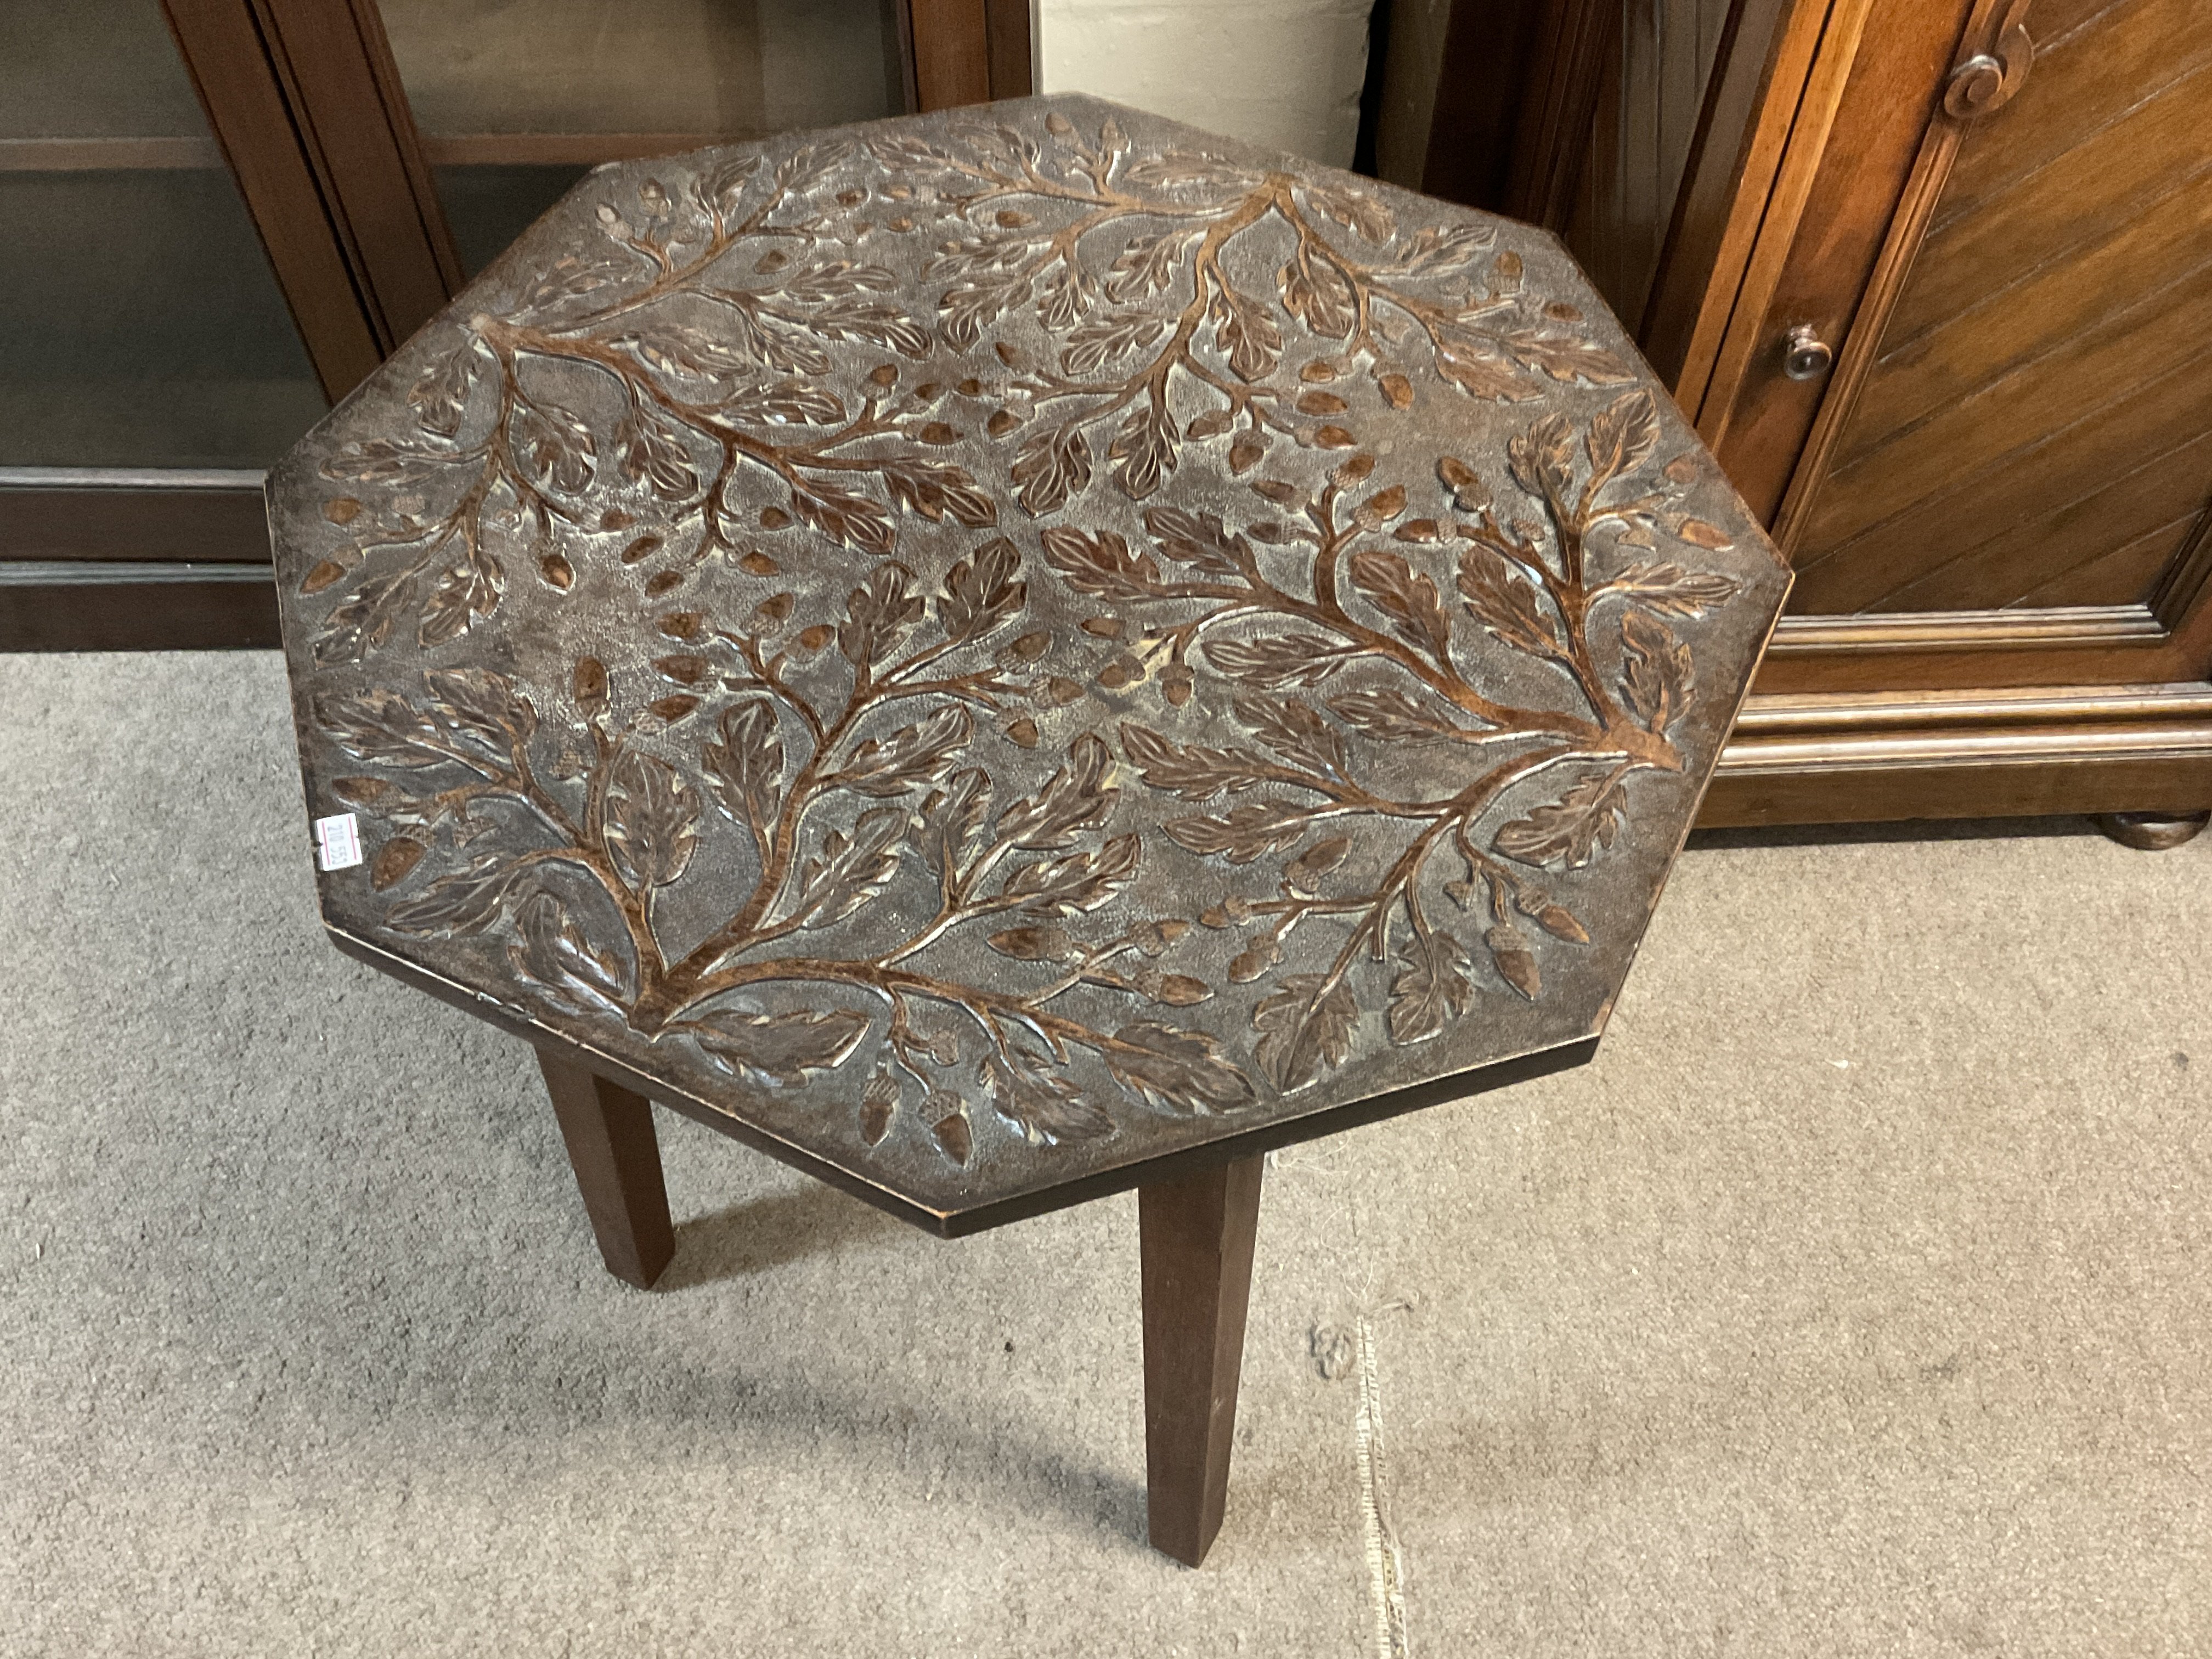 A carved oak hexagonal table with acorn and oak le